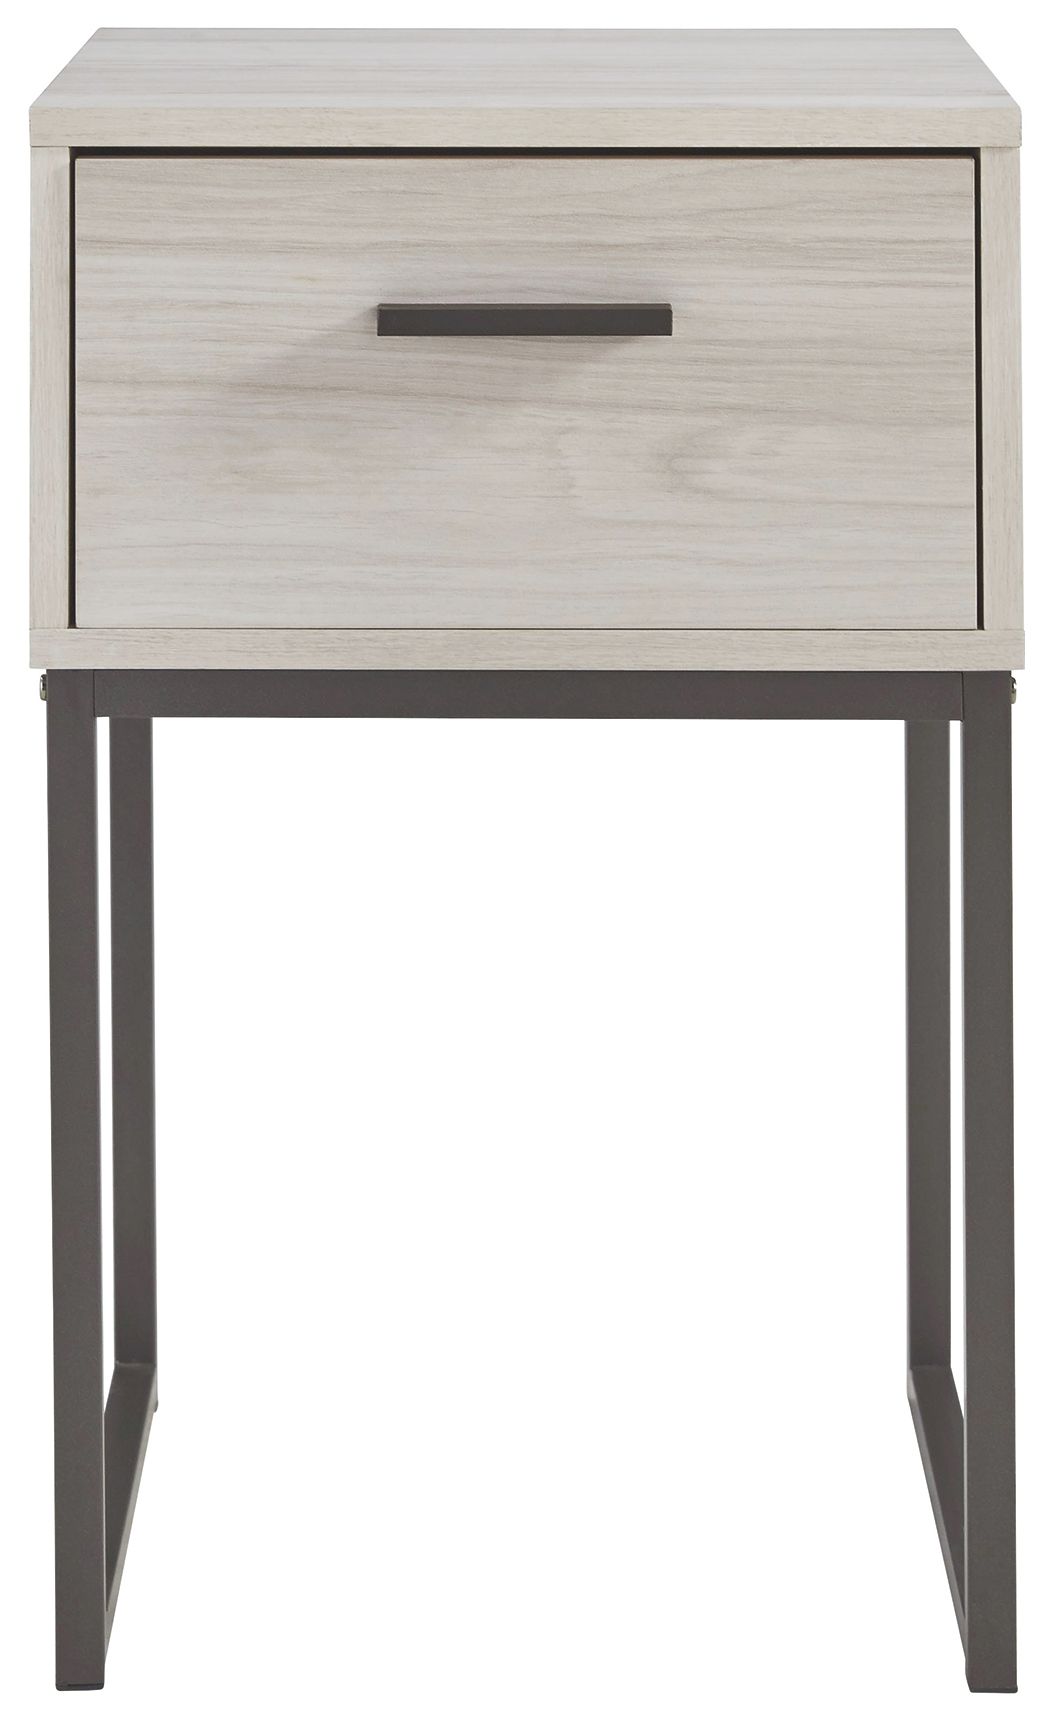 Socalle - Light Natural - One Drawer Night Stand